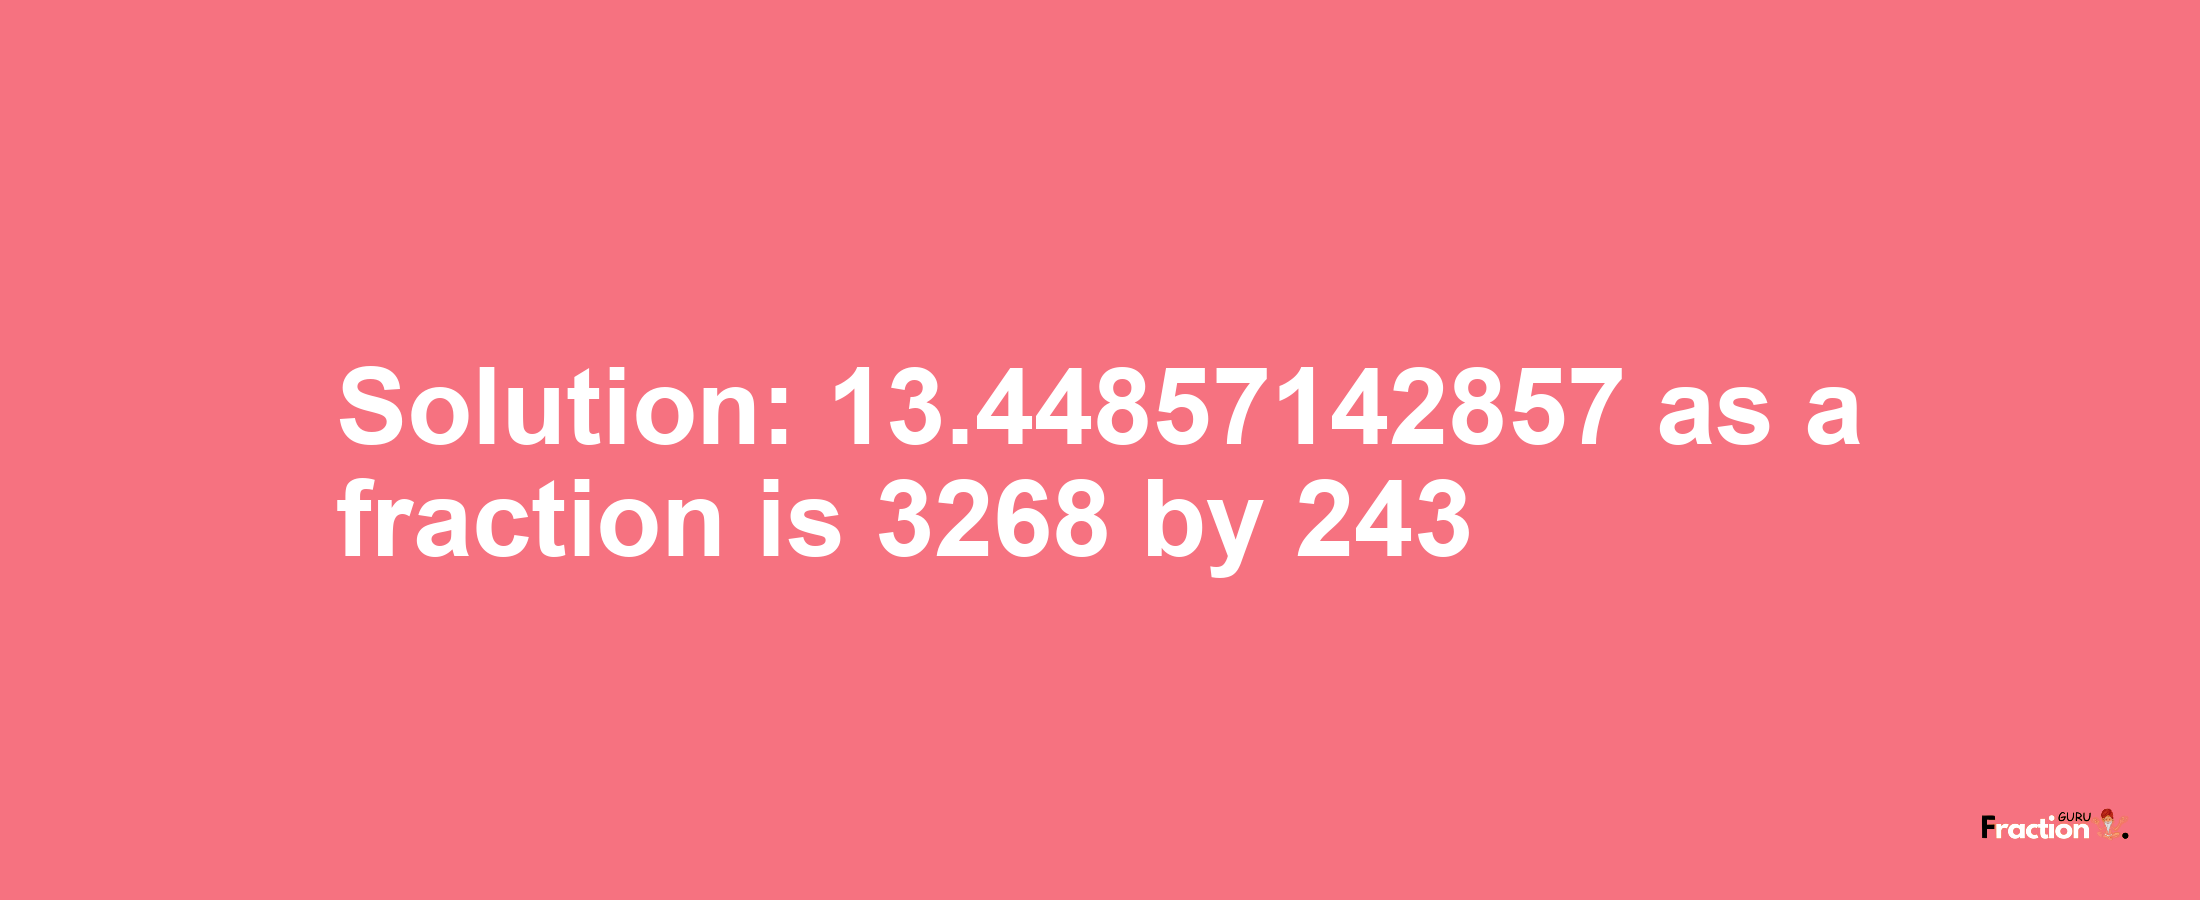 Solution:13.44857142857 as a fraction is 3268/243